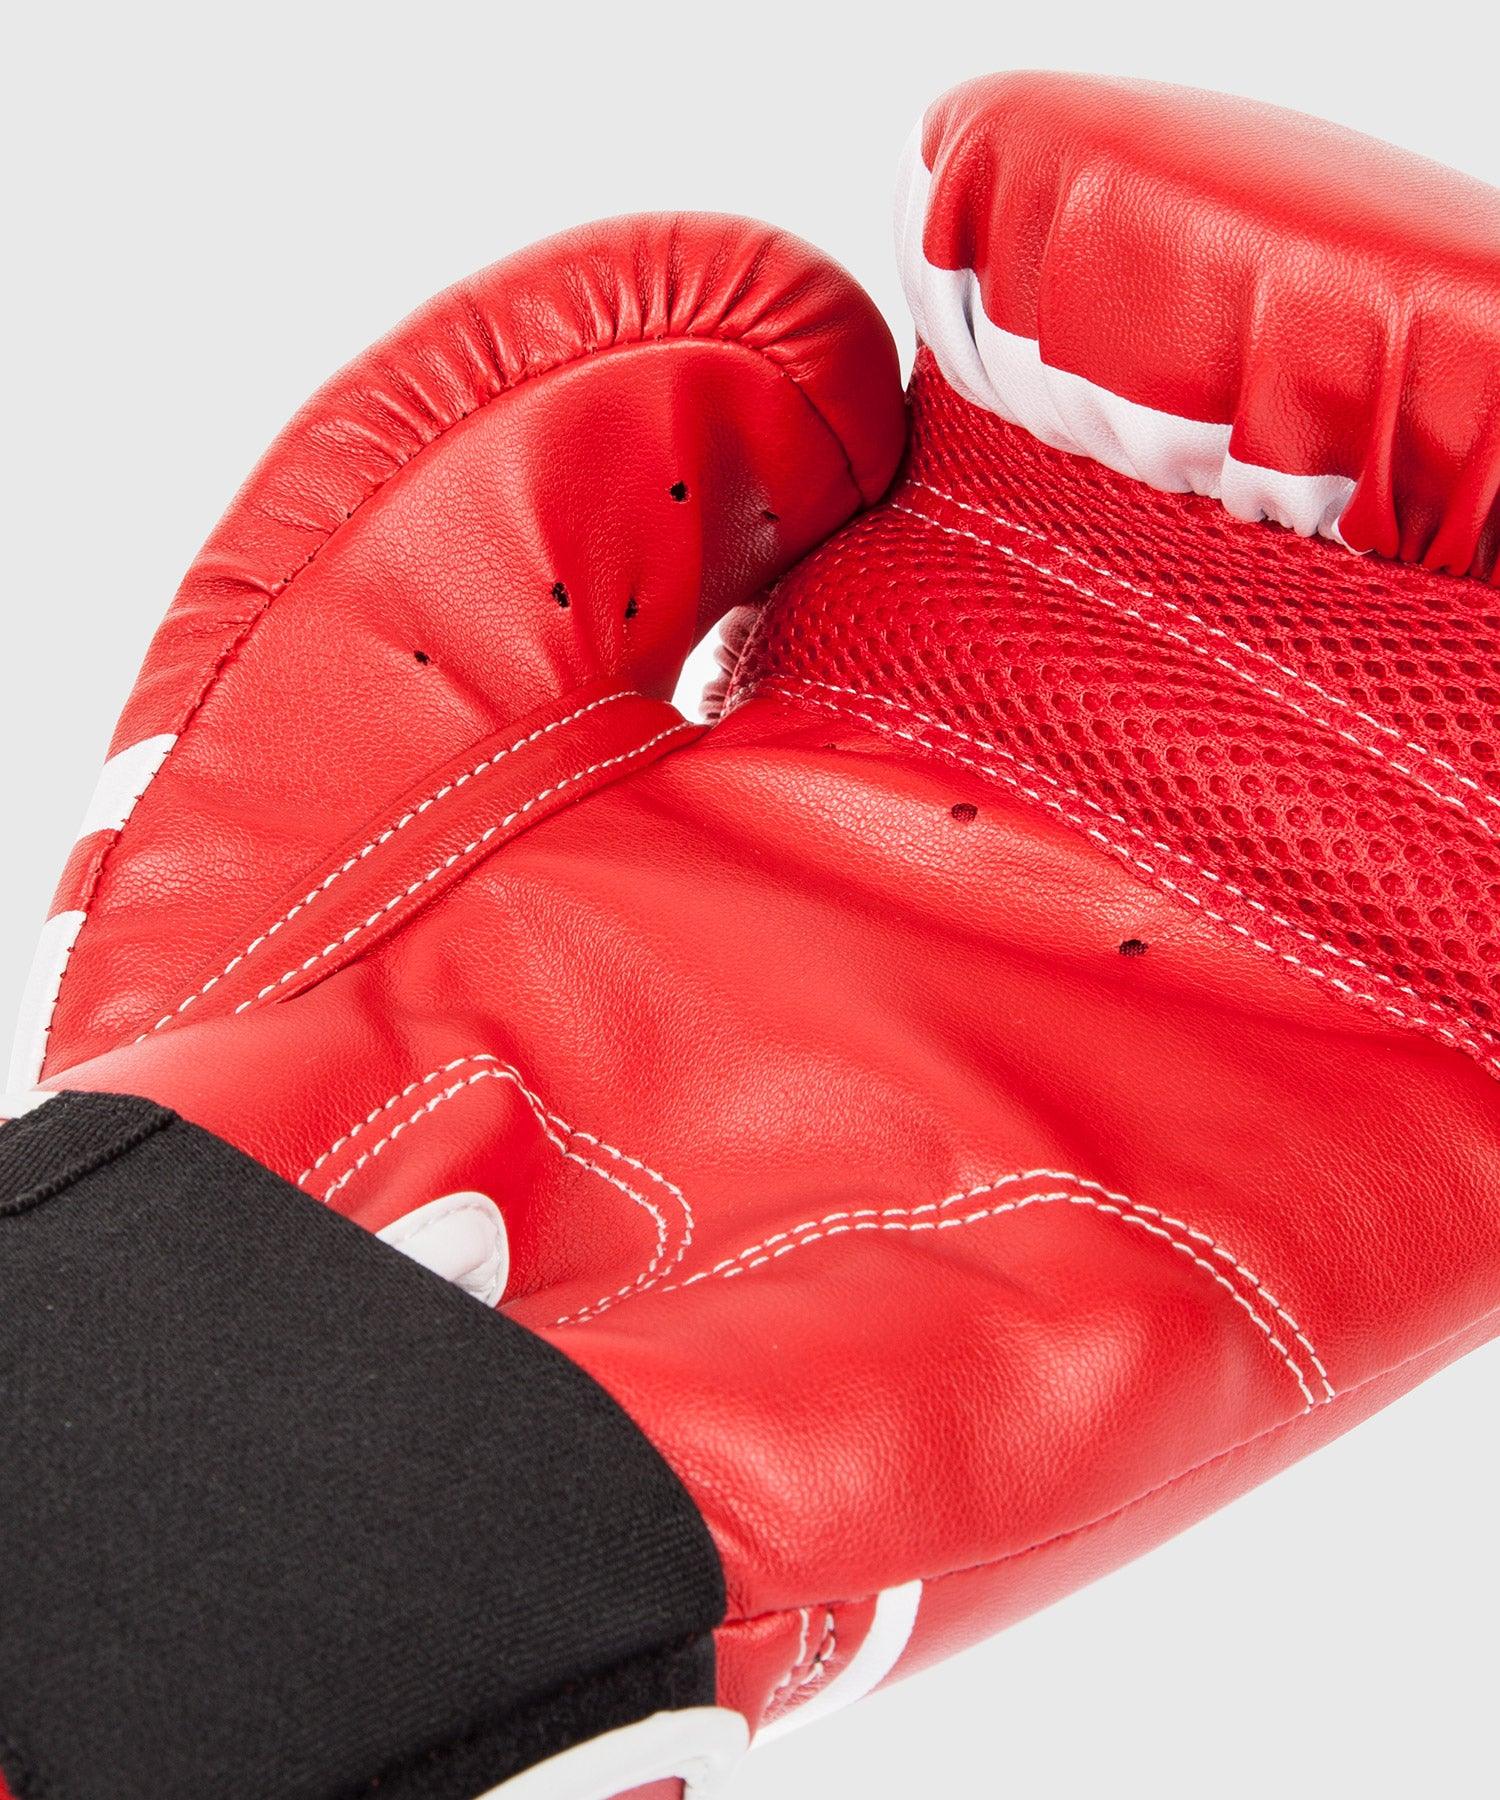 Venum Challenger 2.0 Boxing Gloves - Red Picture 6